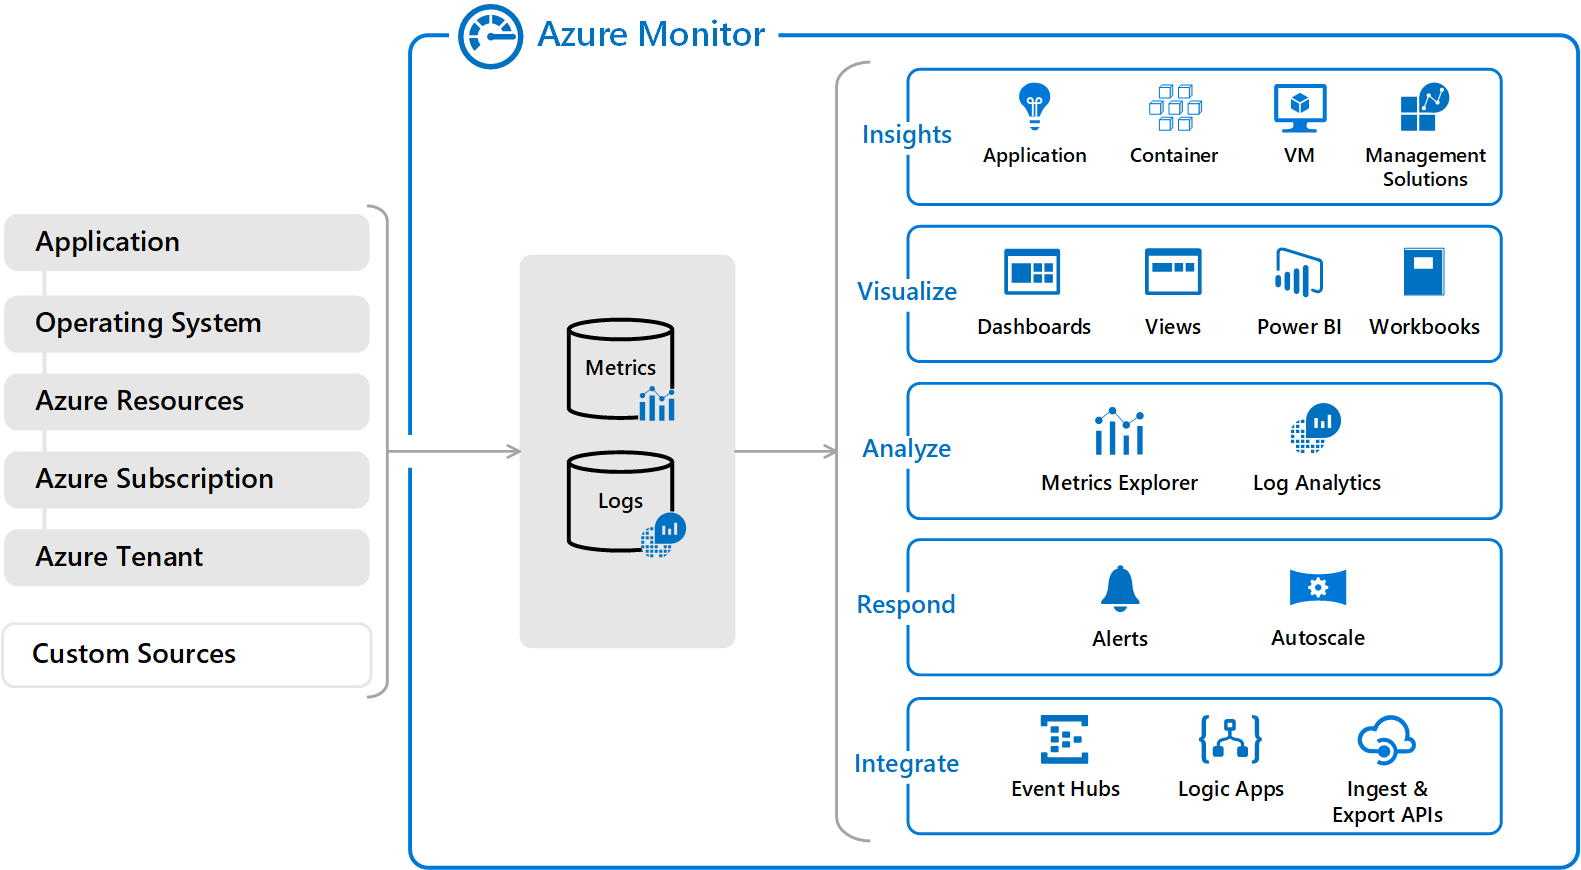 Conceptual overview diagram of Azure Monitor.